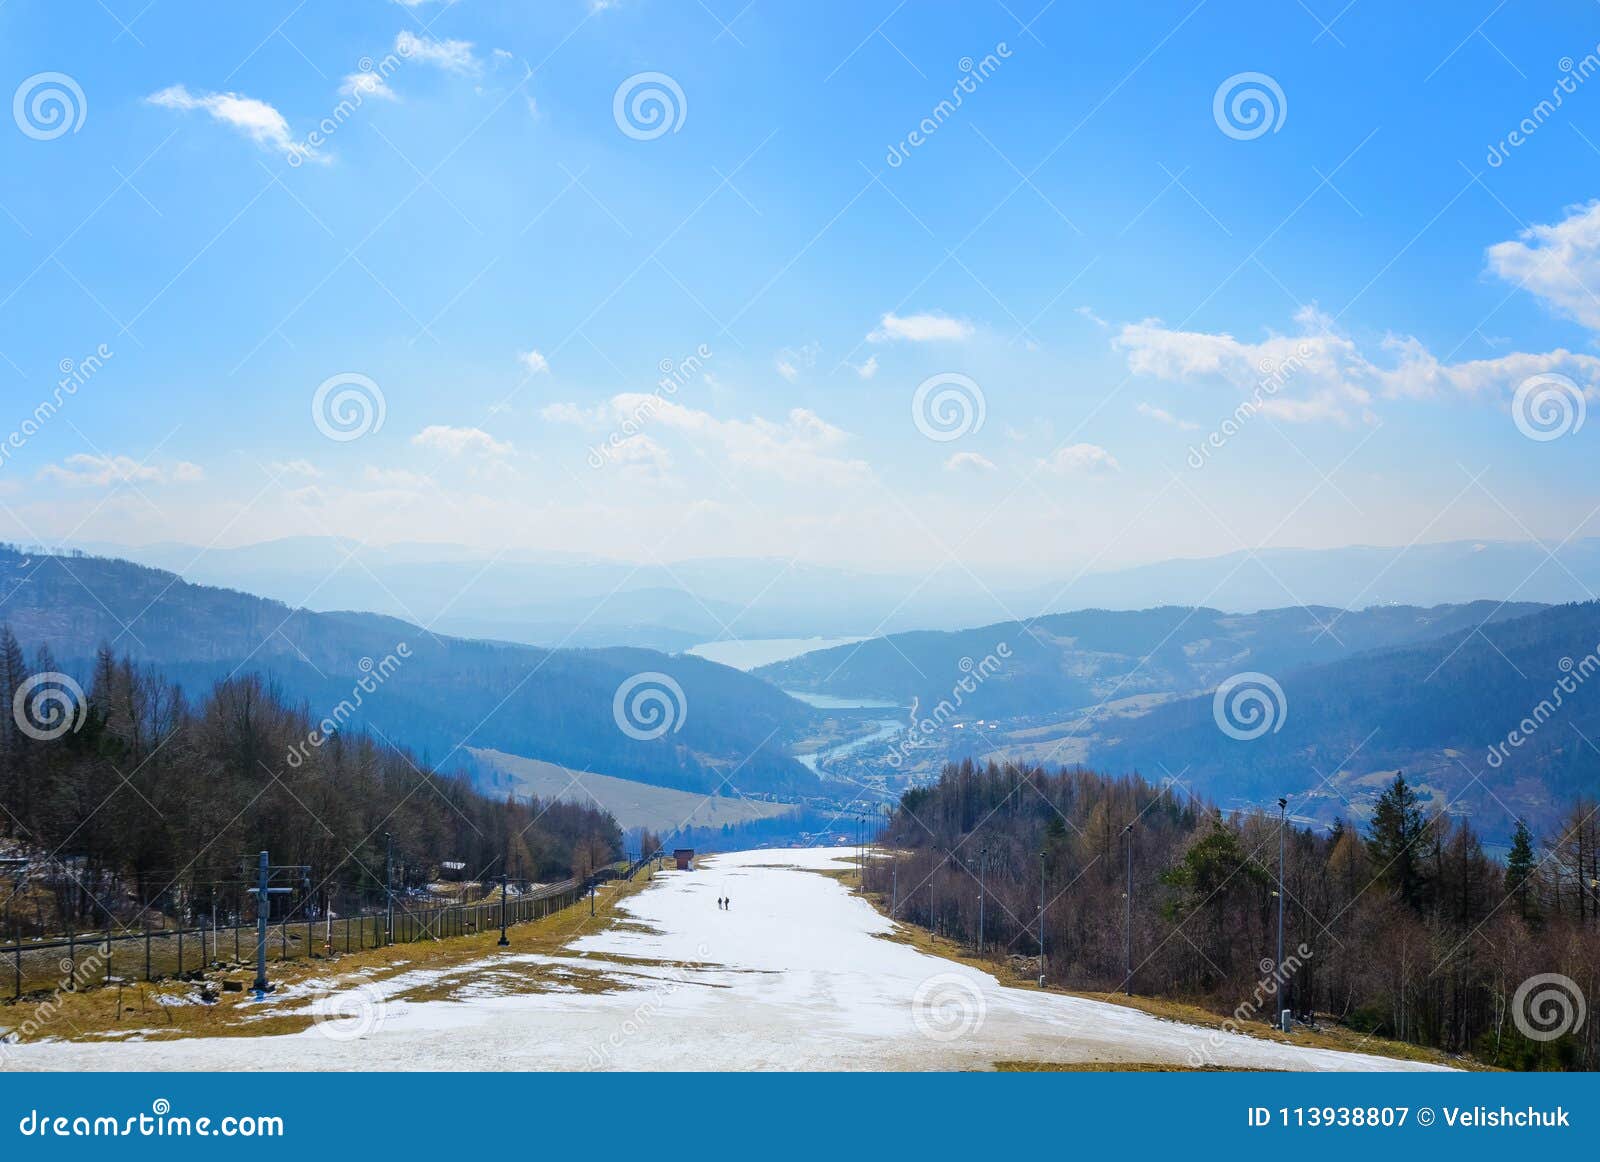 view from zar mountain in the sunny day. poland